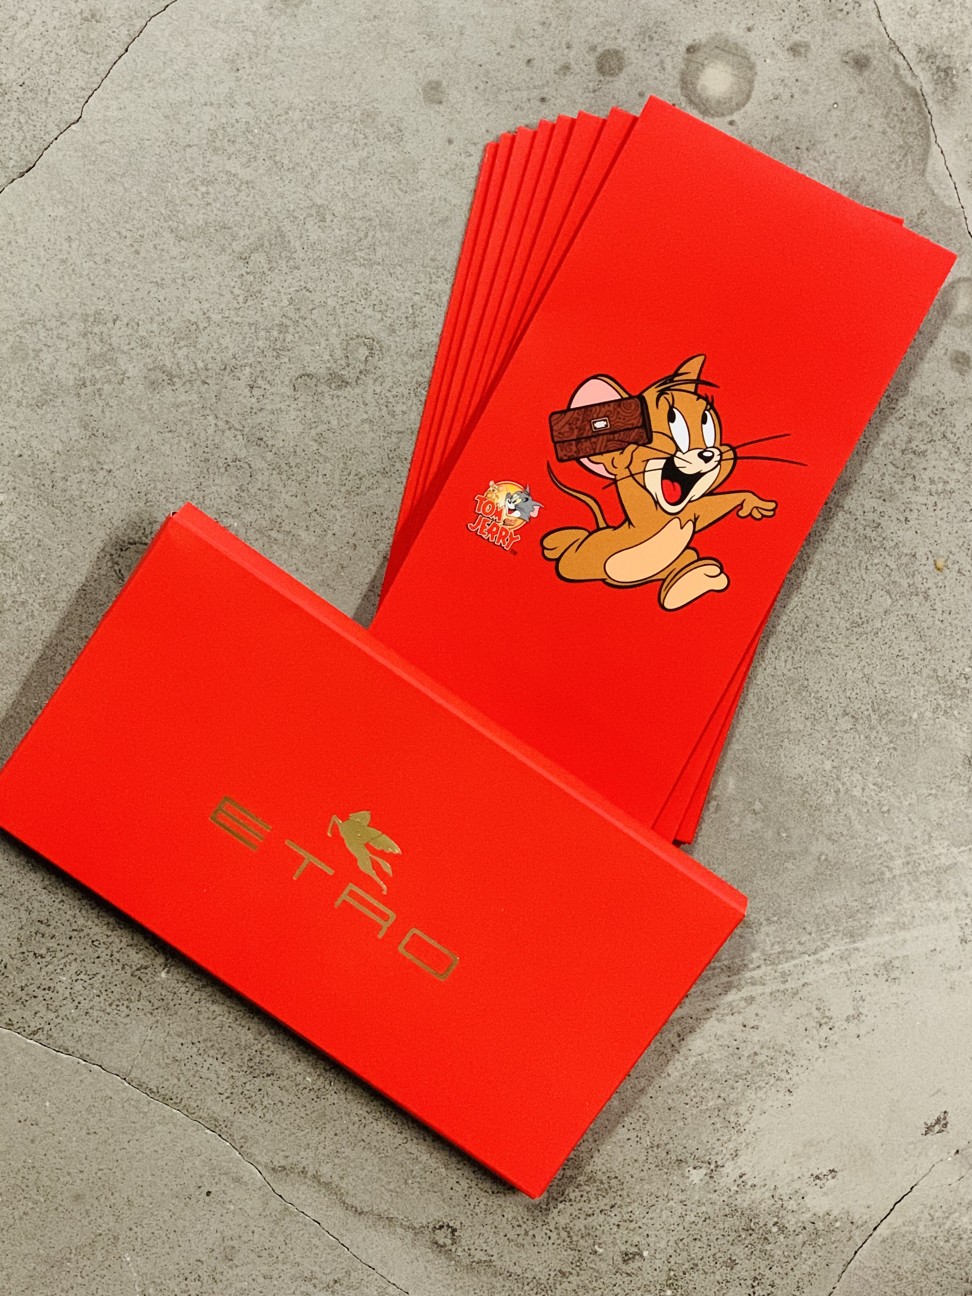 8 top chic and showy red packets, from Gucci, Cartier and more